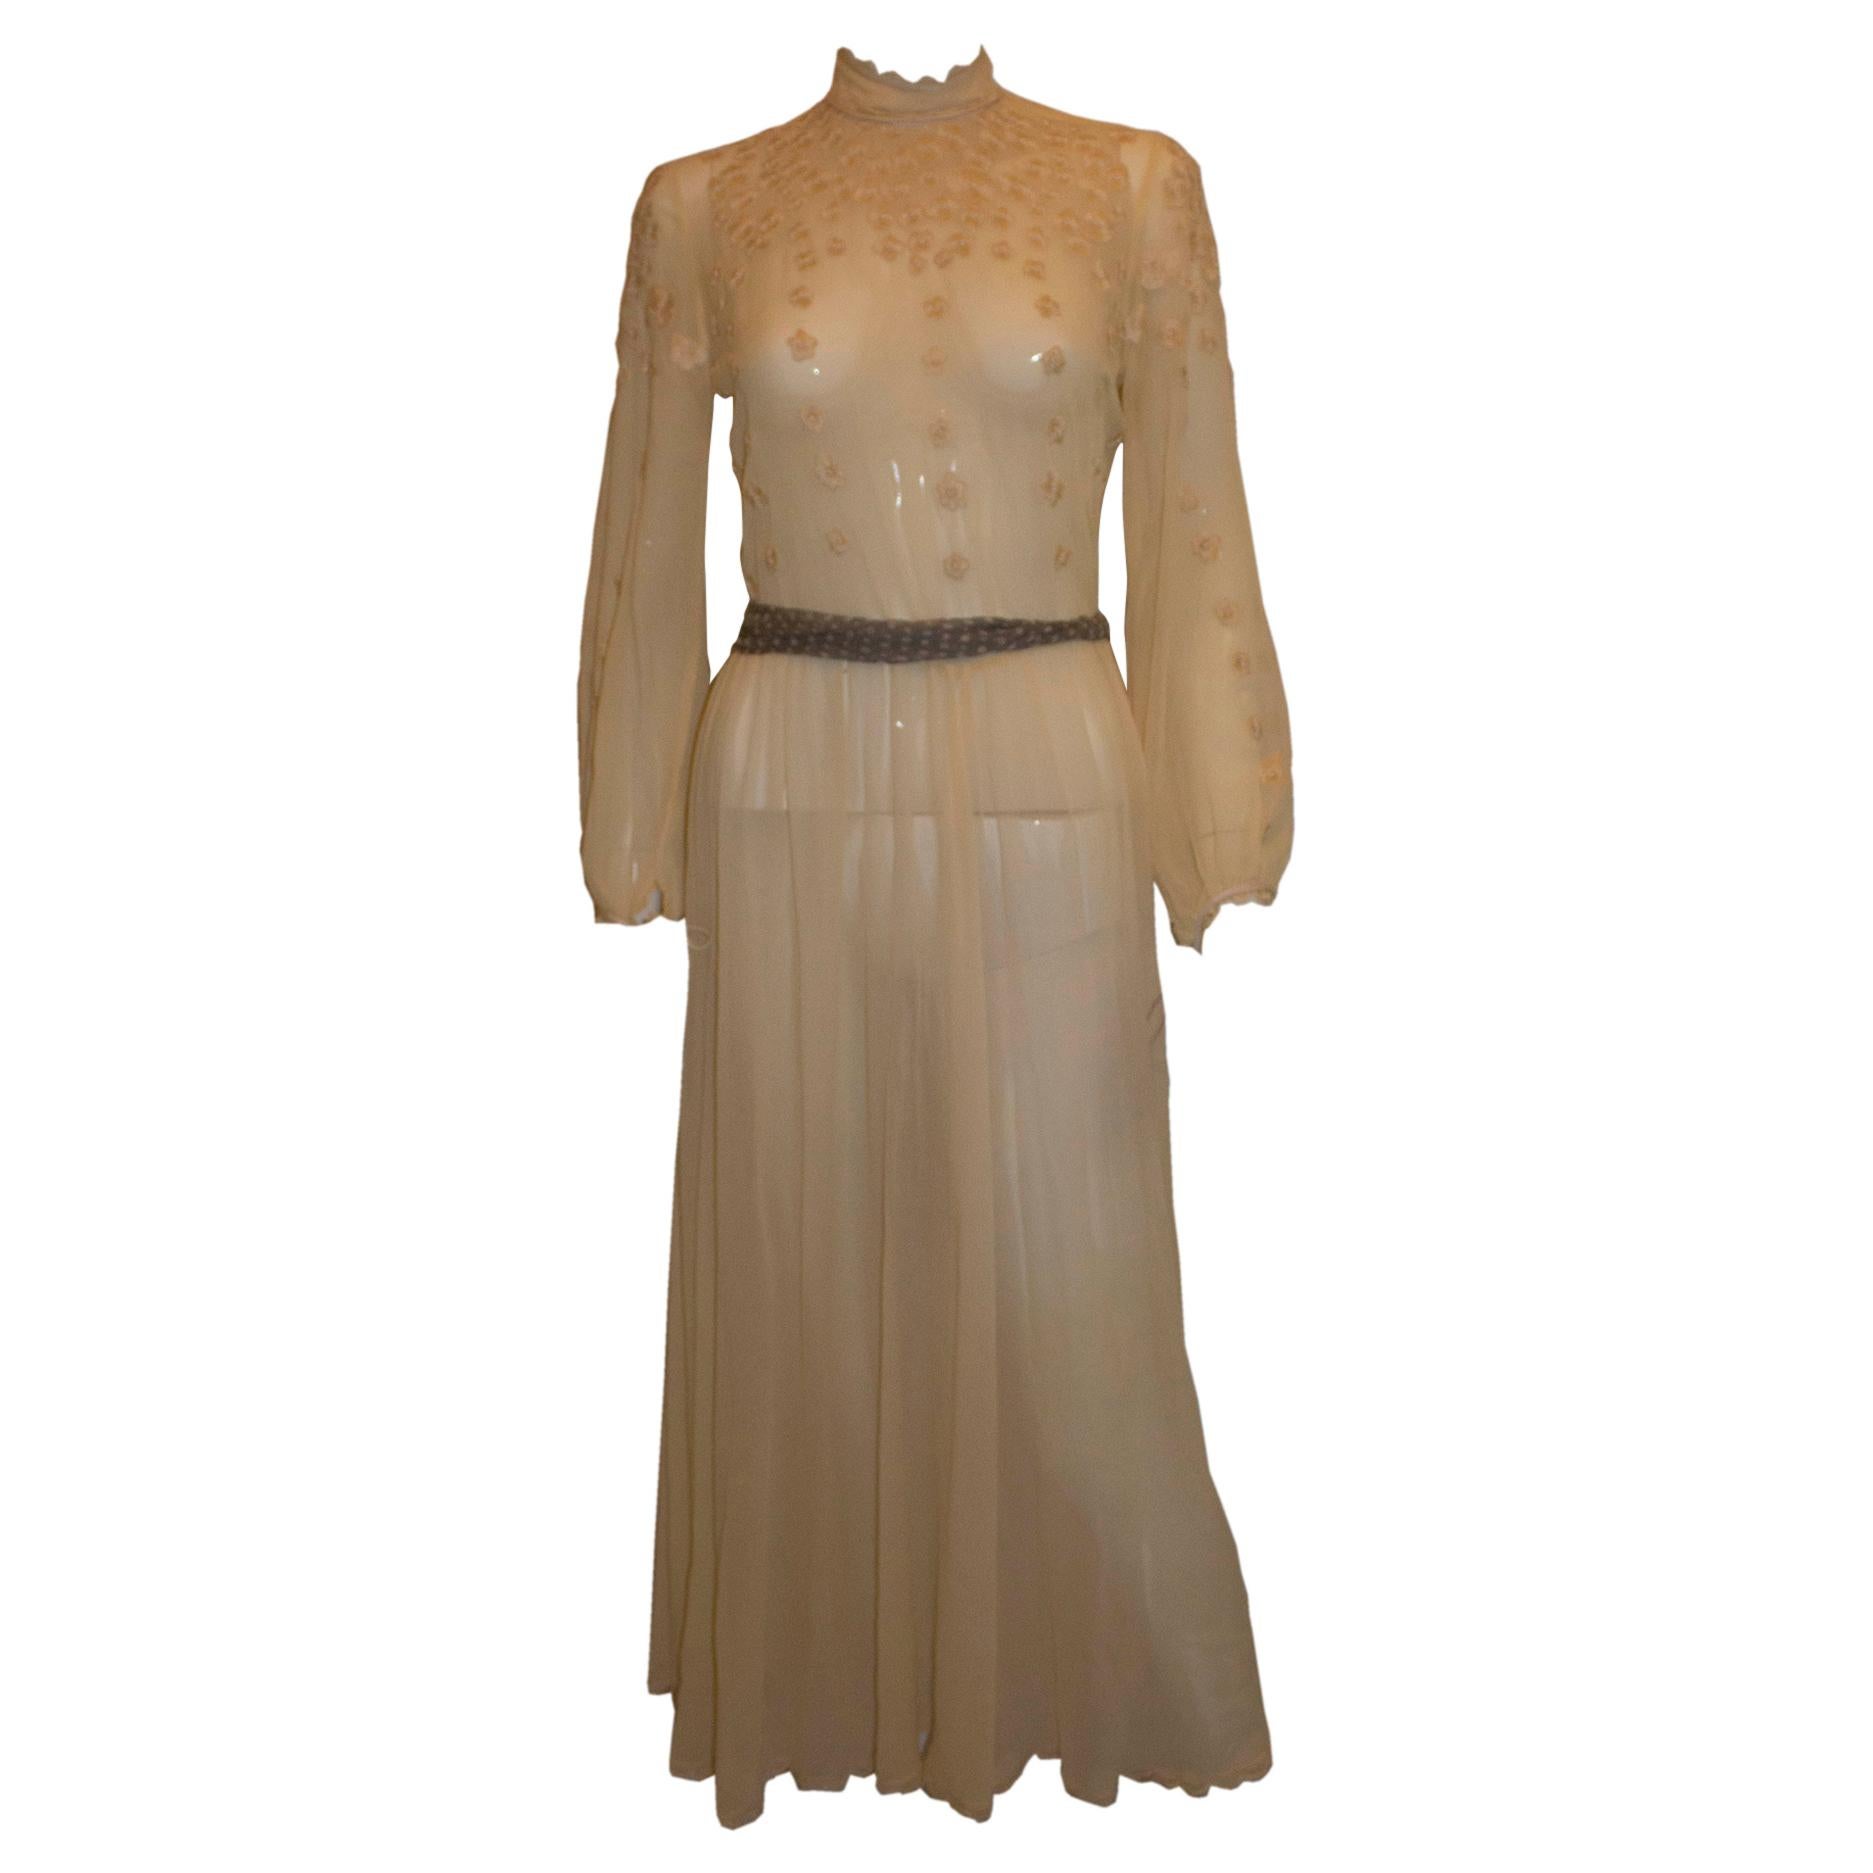 Vintage Ivory Silk Couture Evening Gown  / Wedding Dress